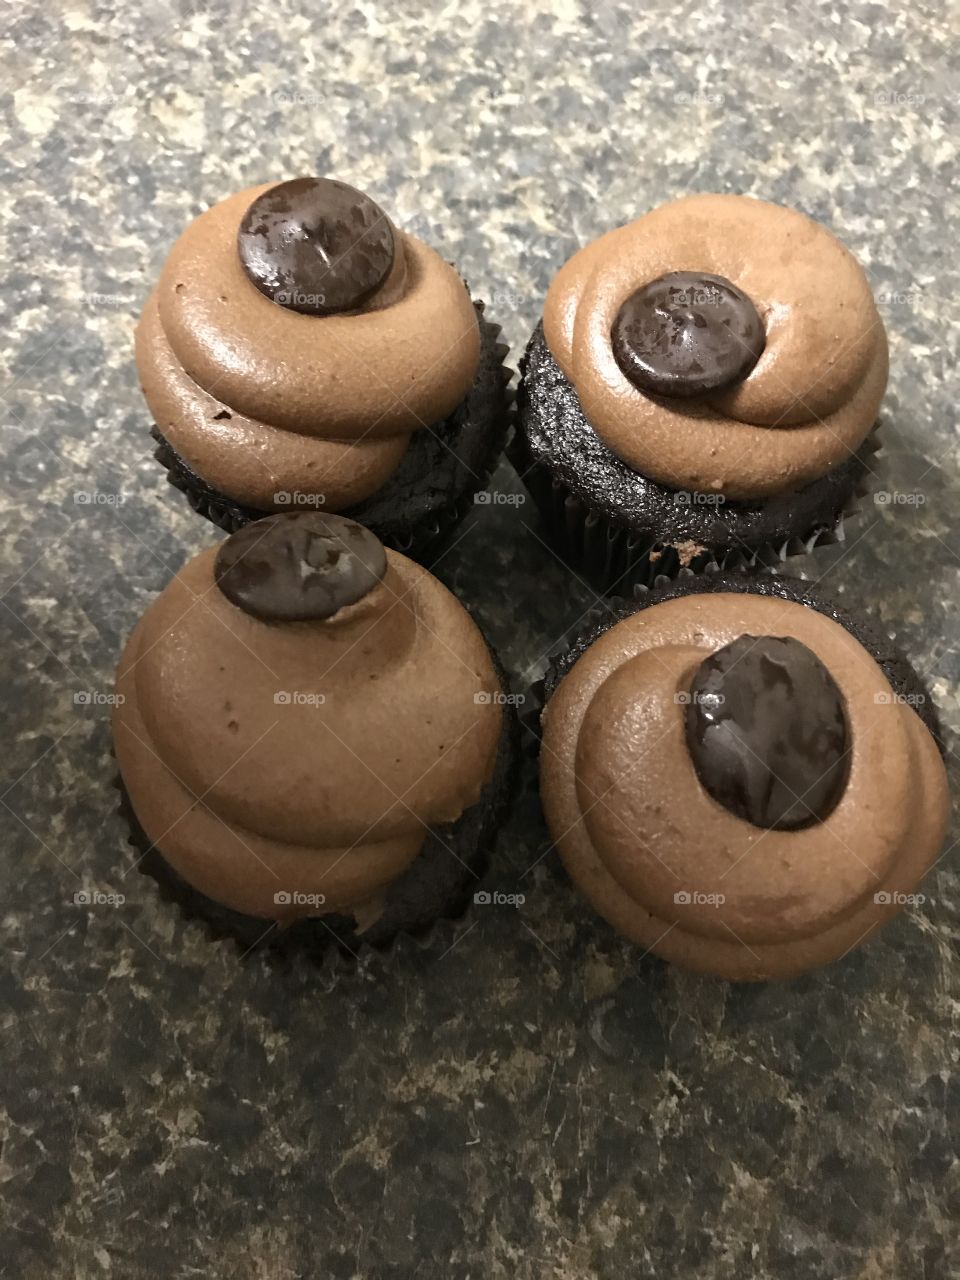 Cup cakes that look like something else? 